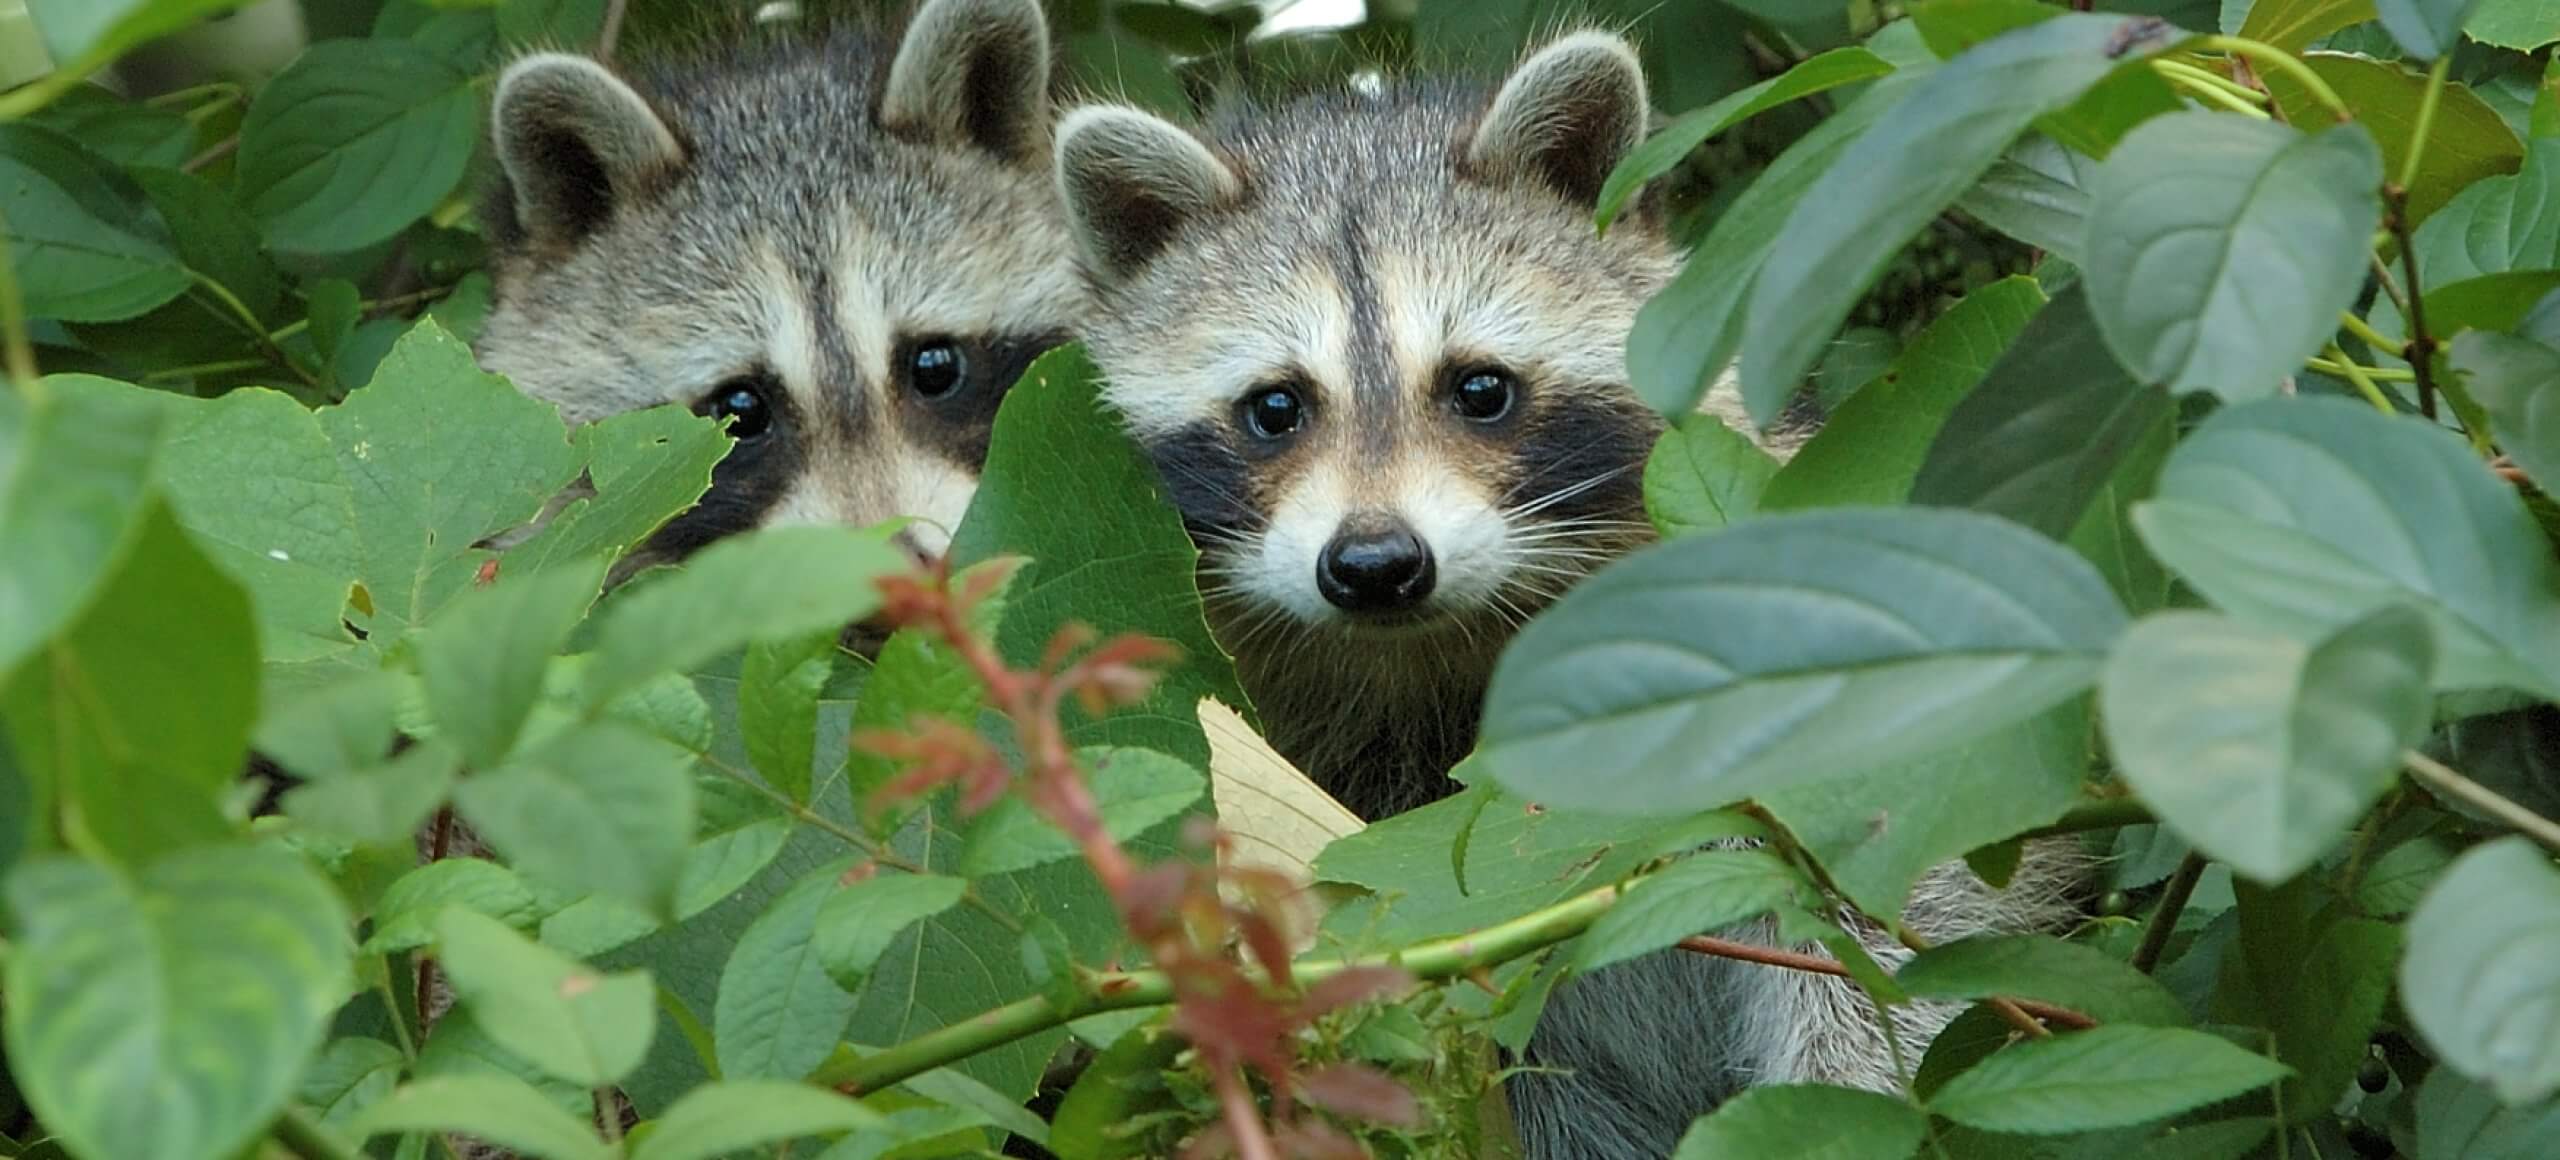 Two raccoons peek out from a lush cover of green leaves.